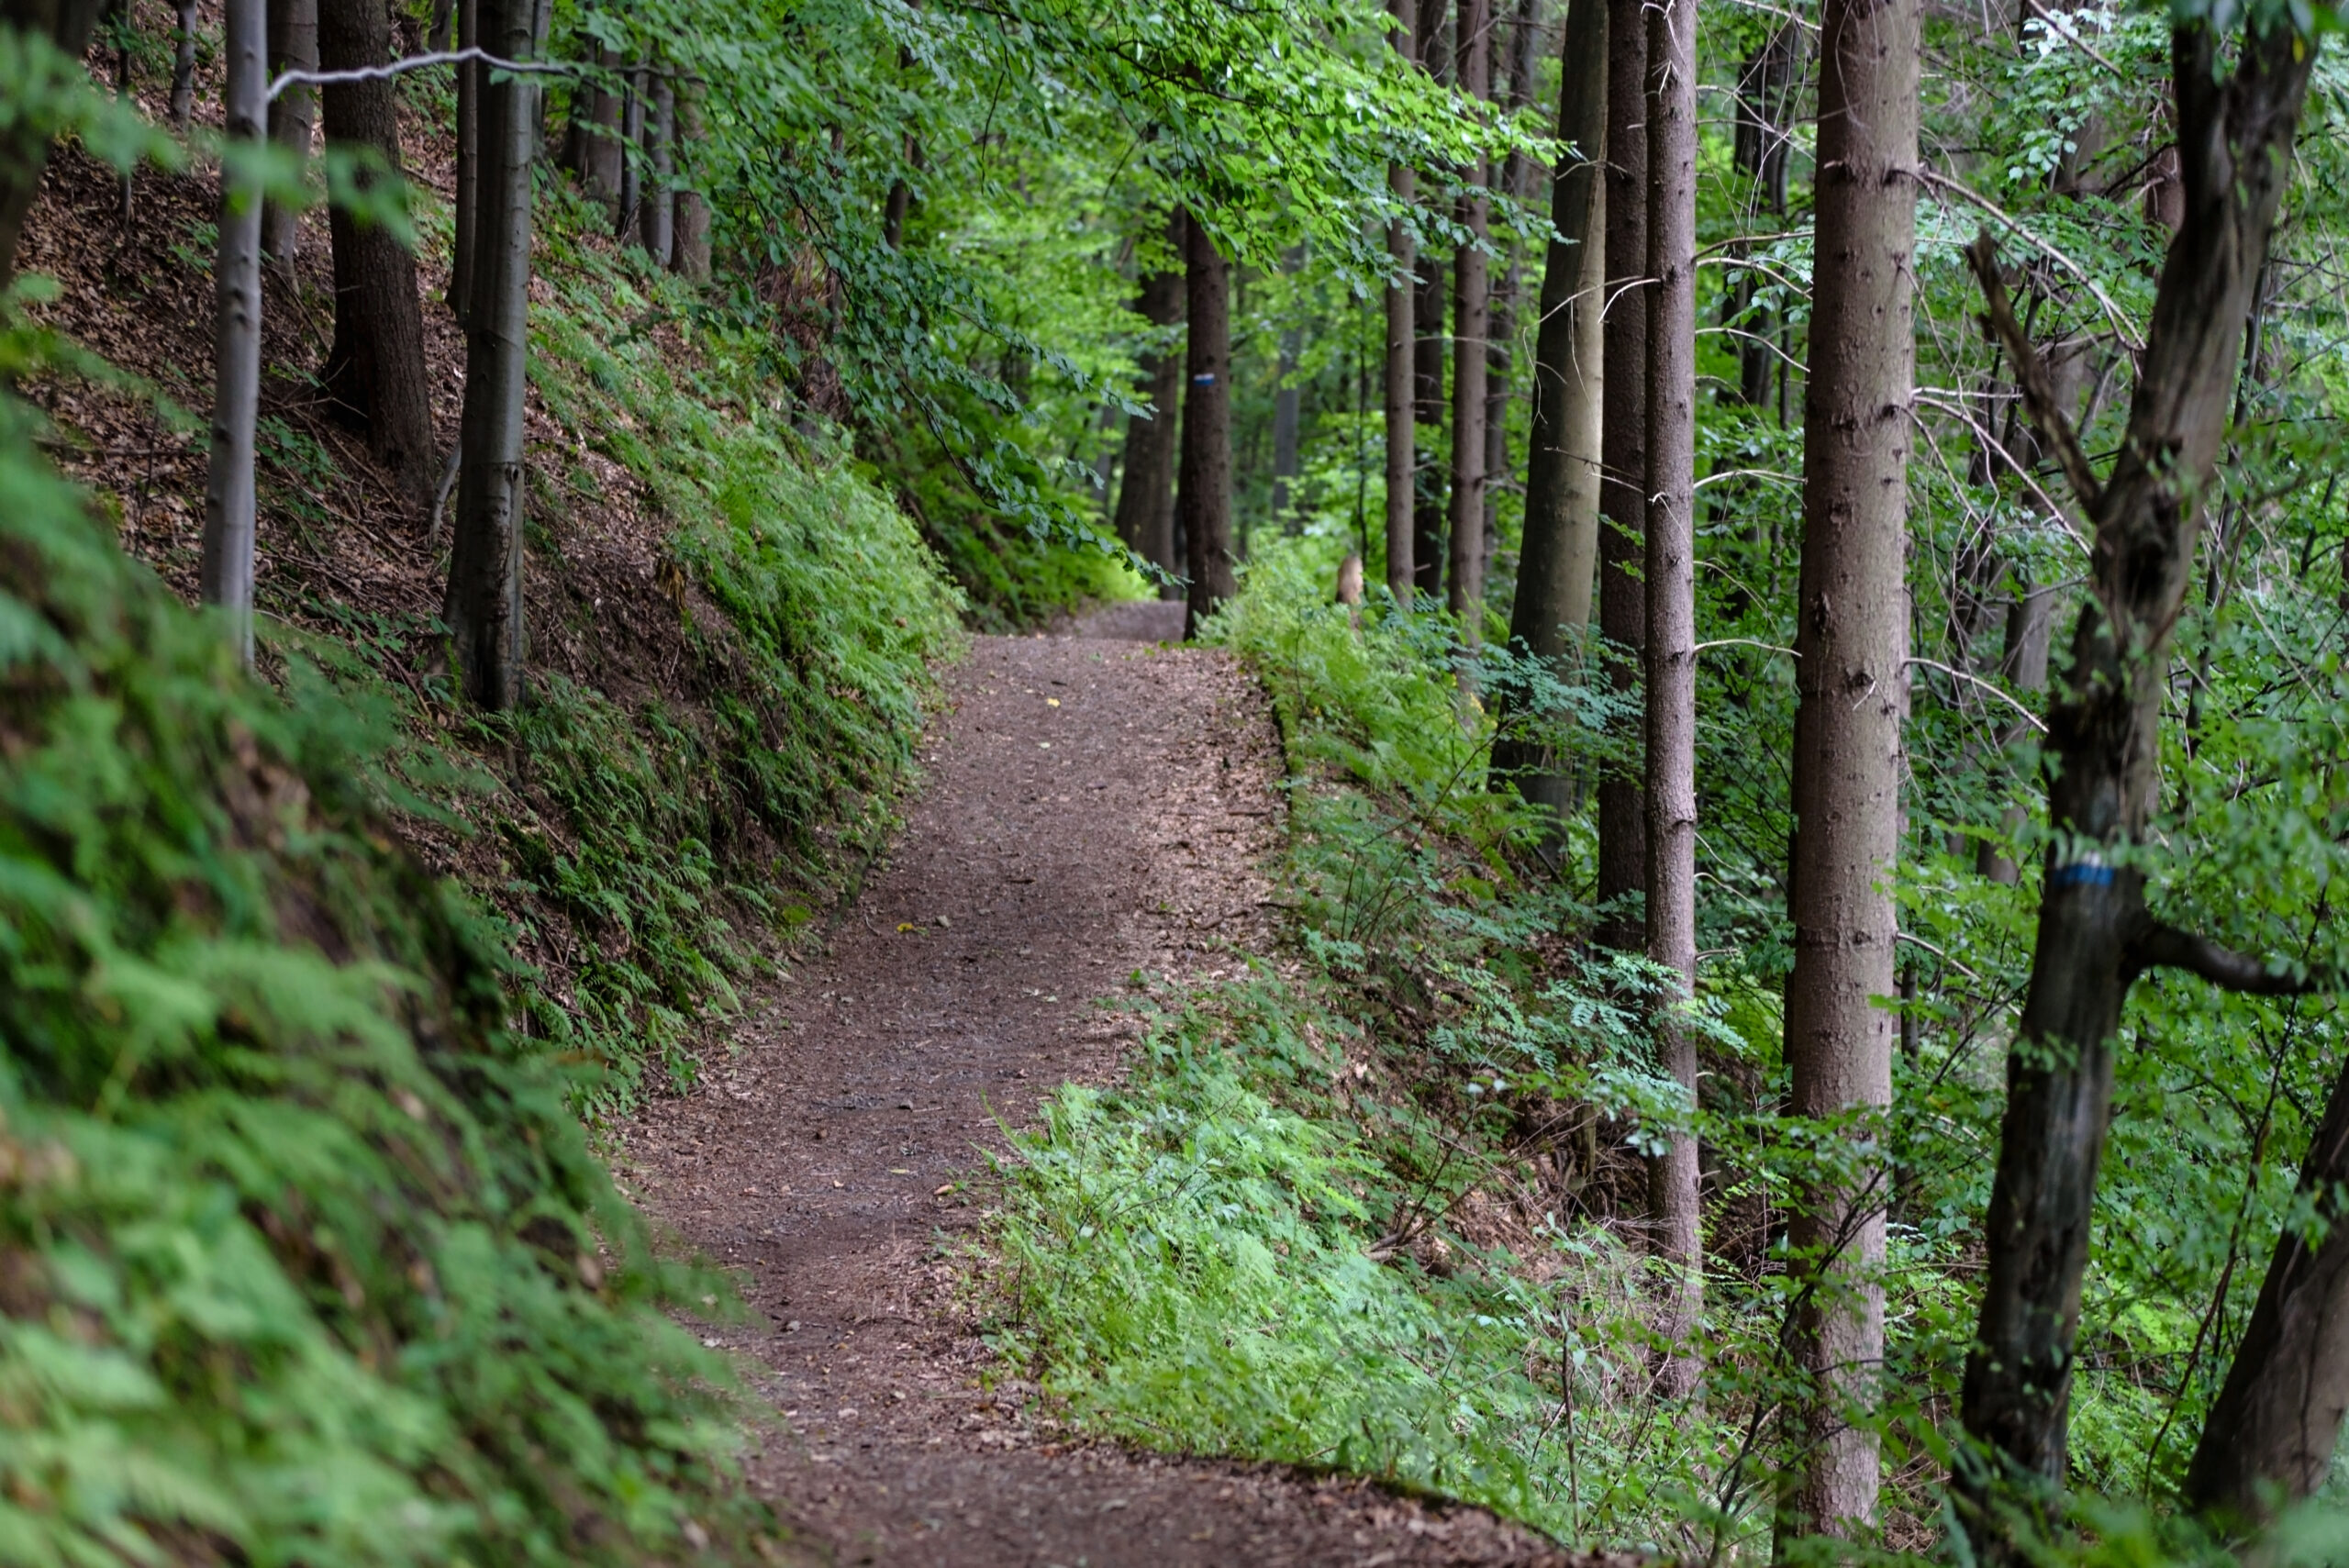 How Do I Vacuum And Clean Outdoor Recreational Trails And Hiking Areas?